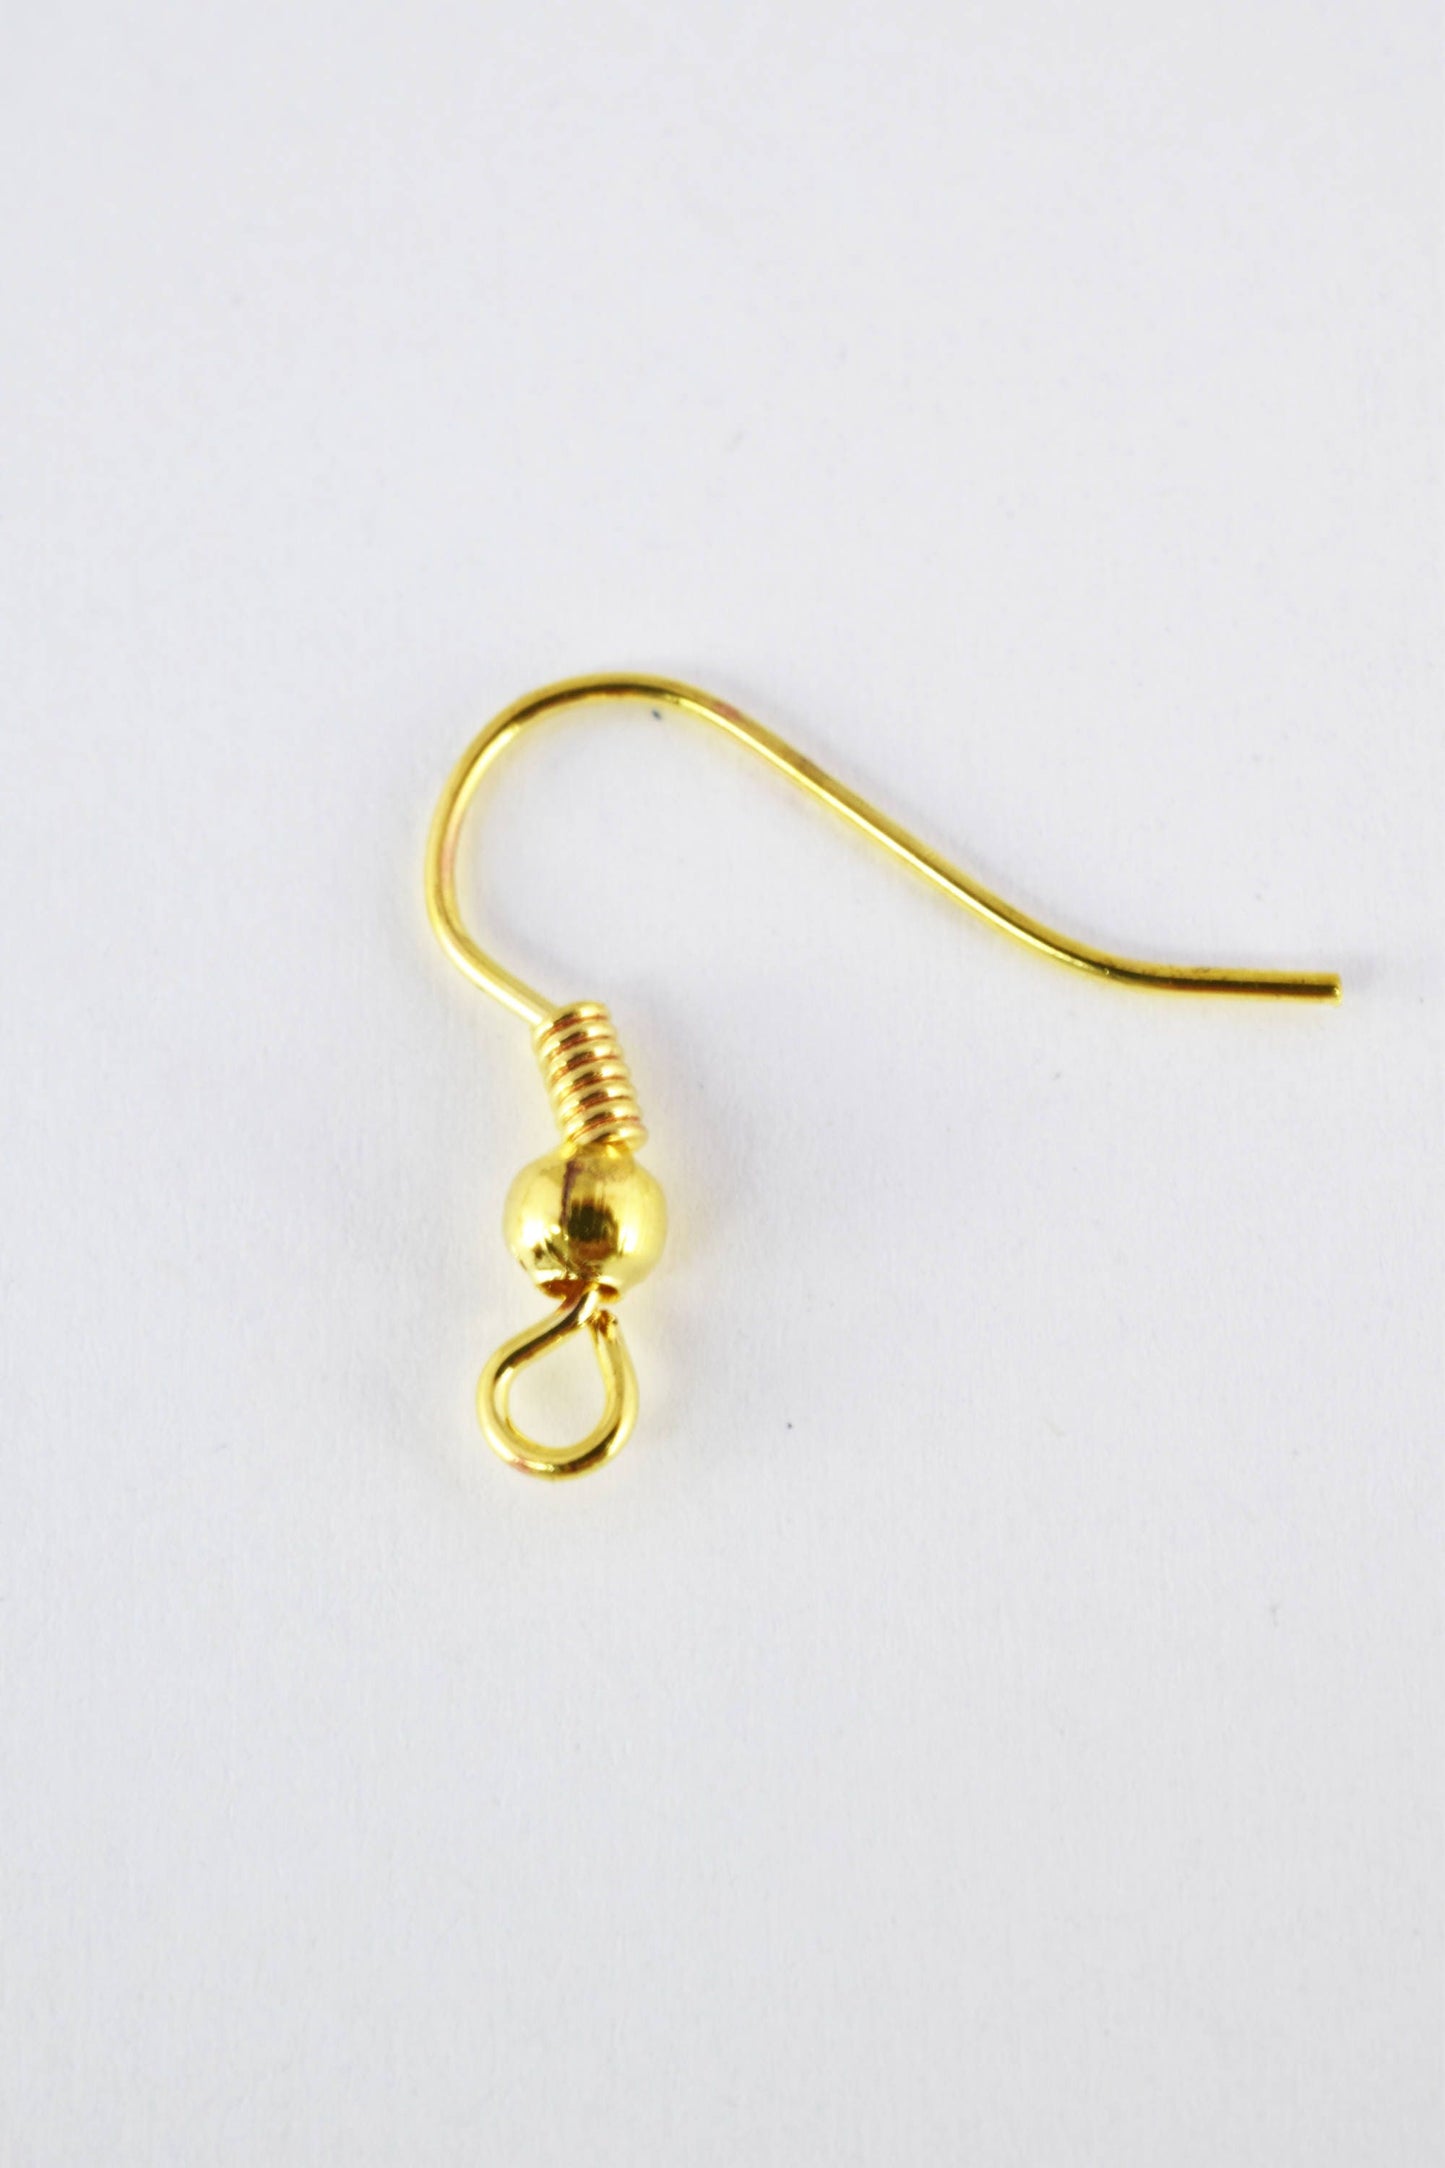 100 PCs Earring Wire coil Findings Fish hook Gun Metal/Antique Copper/Antique Brass/Gold Plated Earring Wire,Jewelry Supplier and wholesale